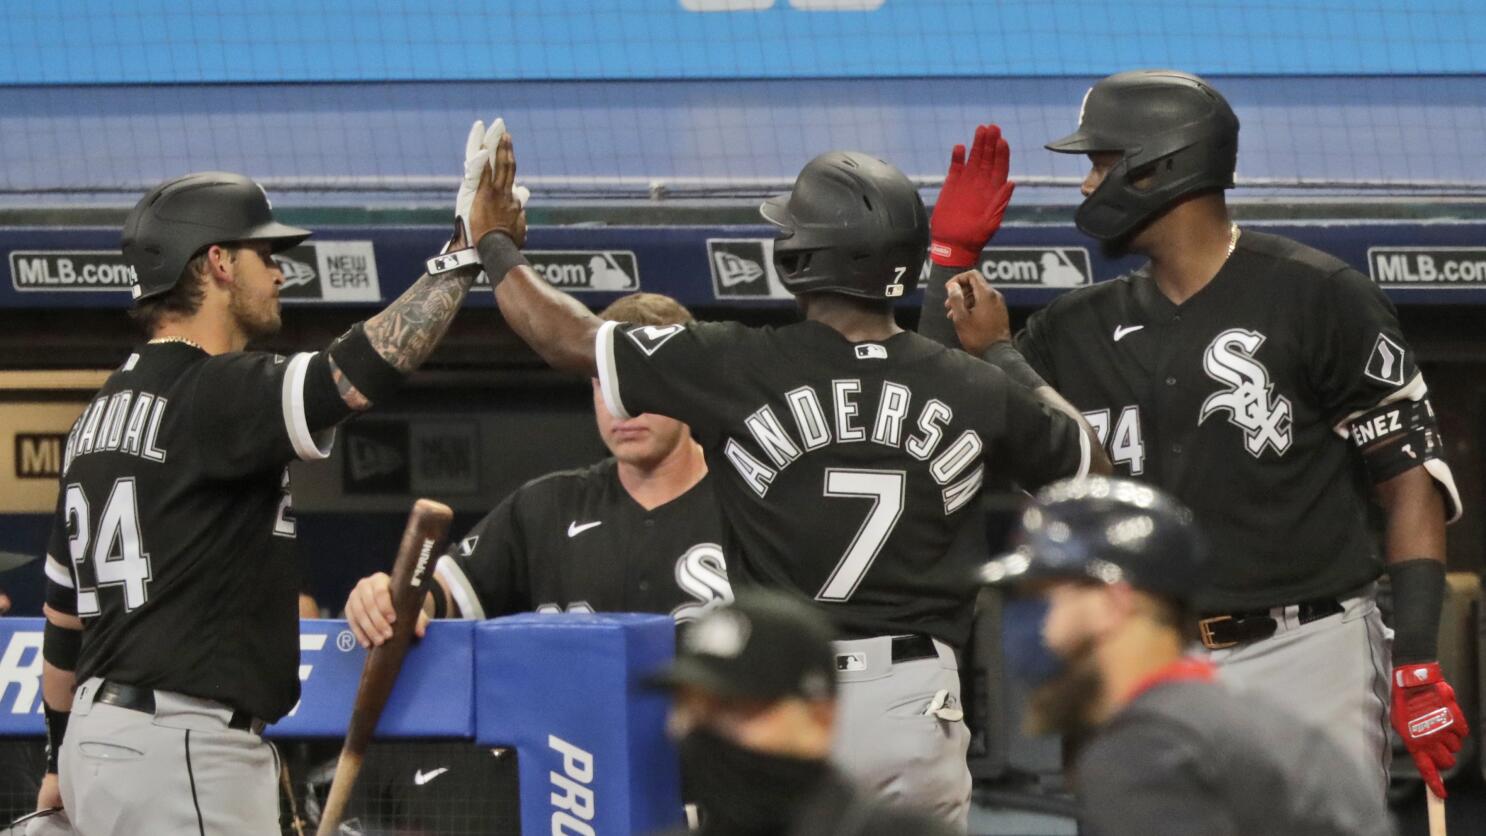 White Sox outfielder Luis Robert Jr. returns to starting lineup after  finger injury - The San Diego Union-Tribune